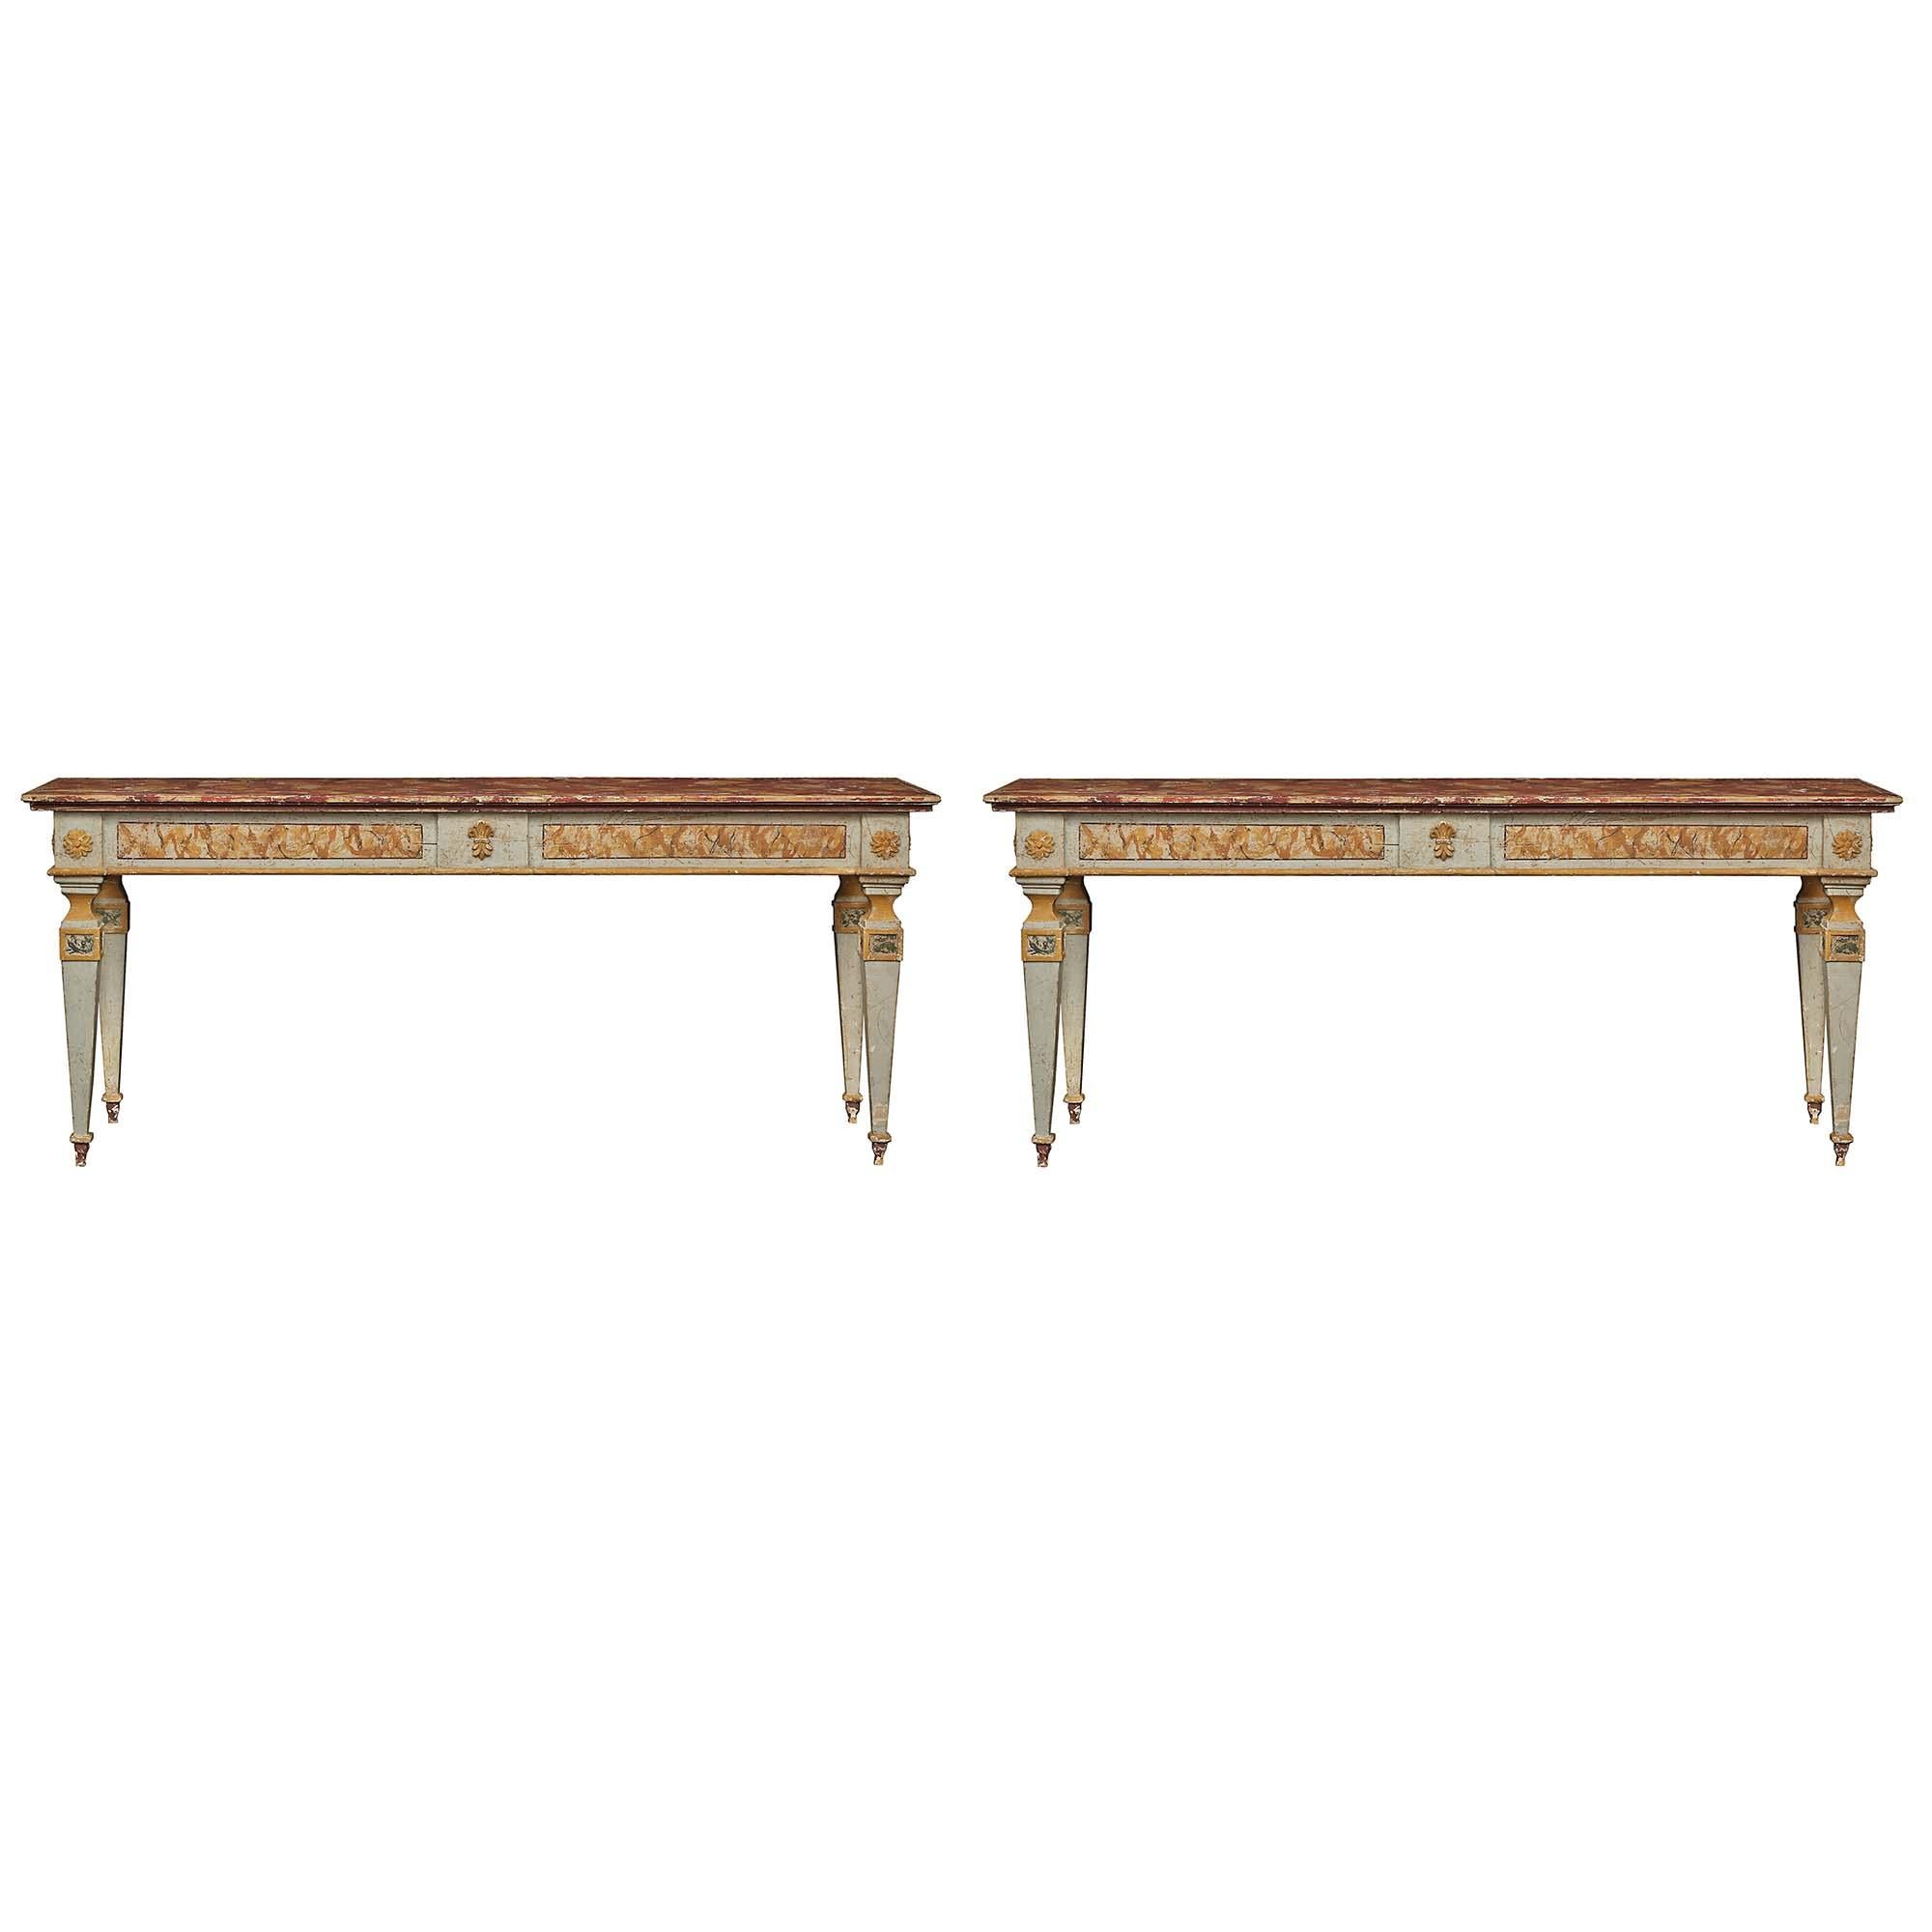 A large pair of Italian painted 19th Century free standing consoles. The pair are raised by four square tapered legs below large yellow carved rosettes. The frieze has two rectangular faux marble designs on both sides of a central Fleur de Lis. The